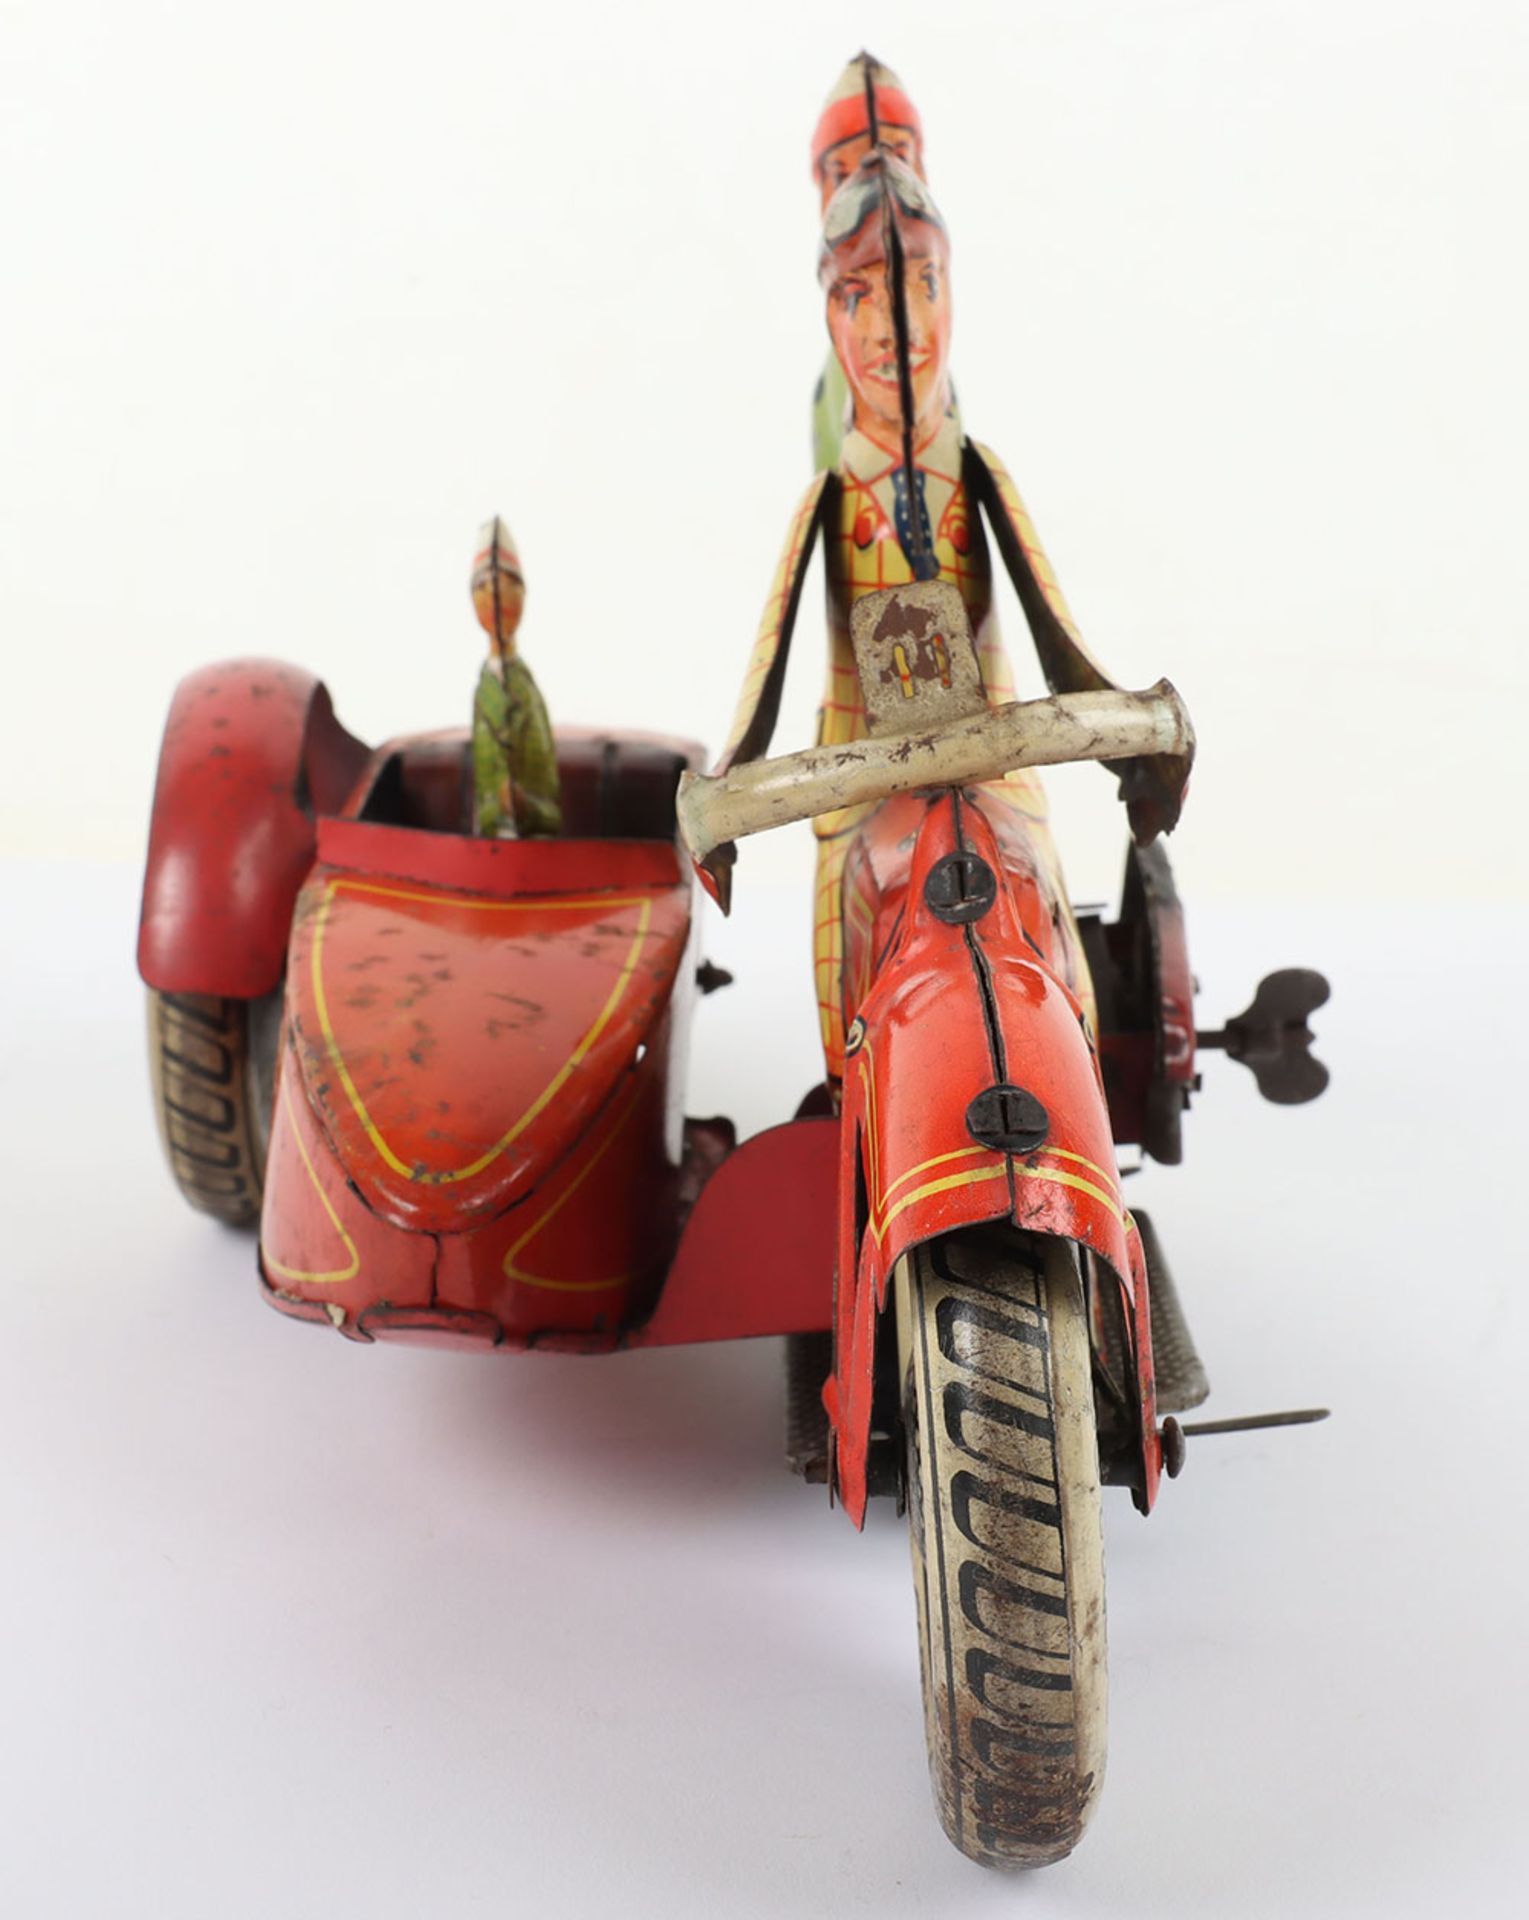 Large and rare Tipp & Co clockwork Motorbike with sidecar, German 1926 - Image 3 of 6